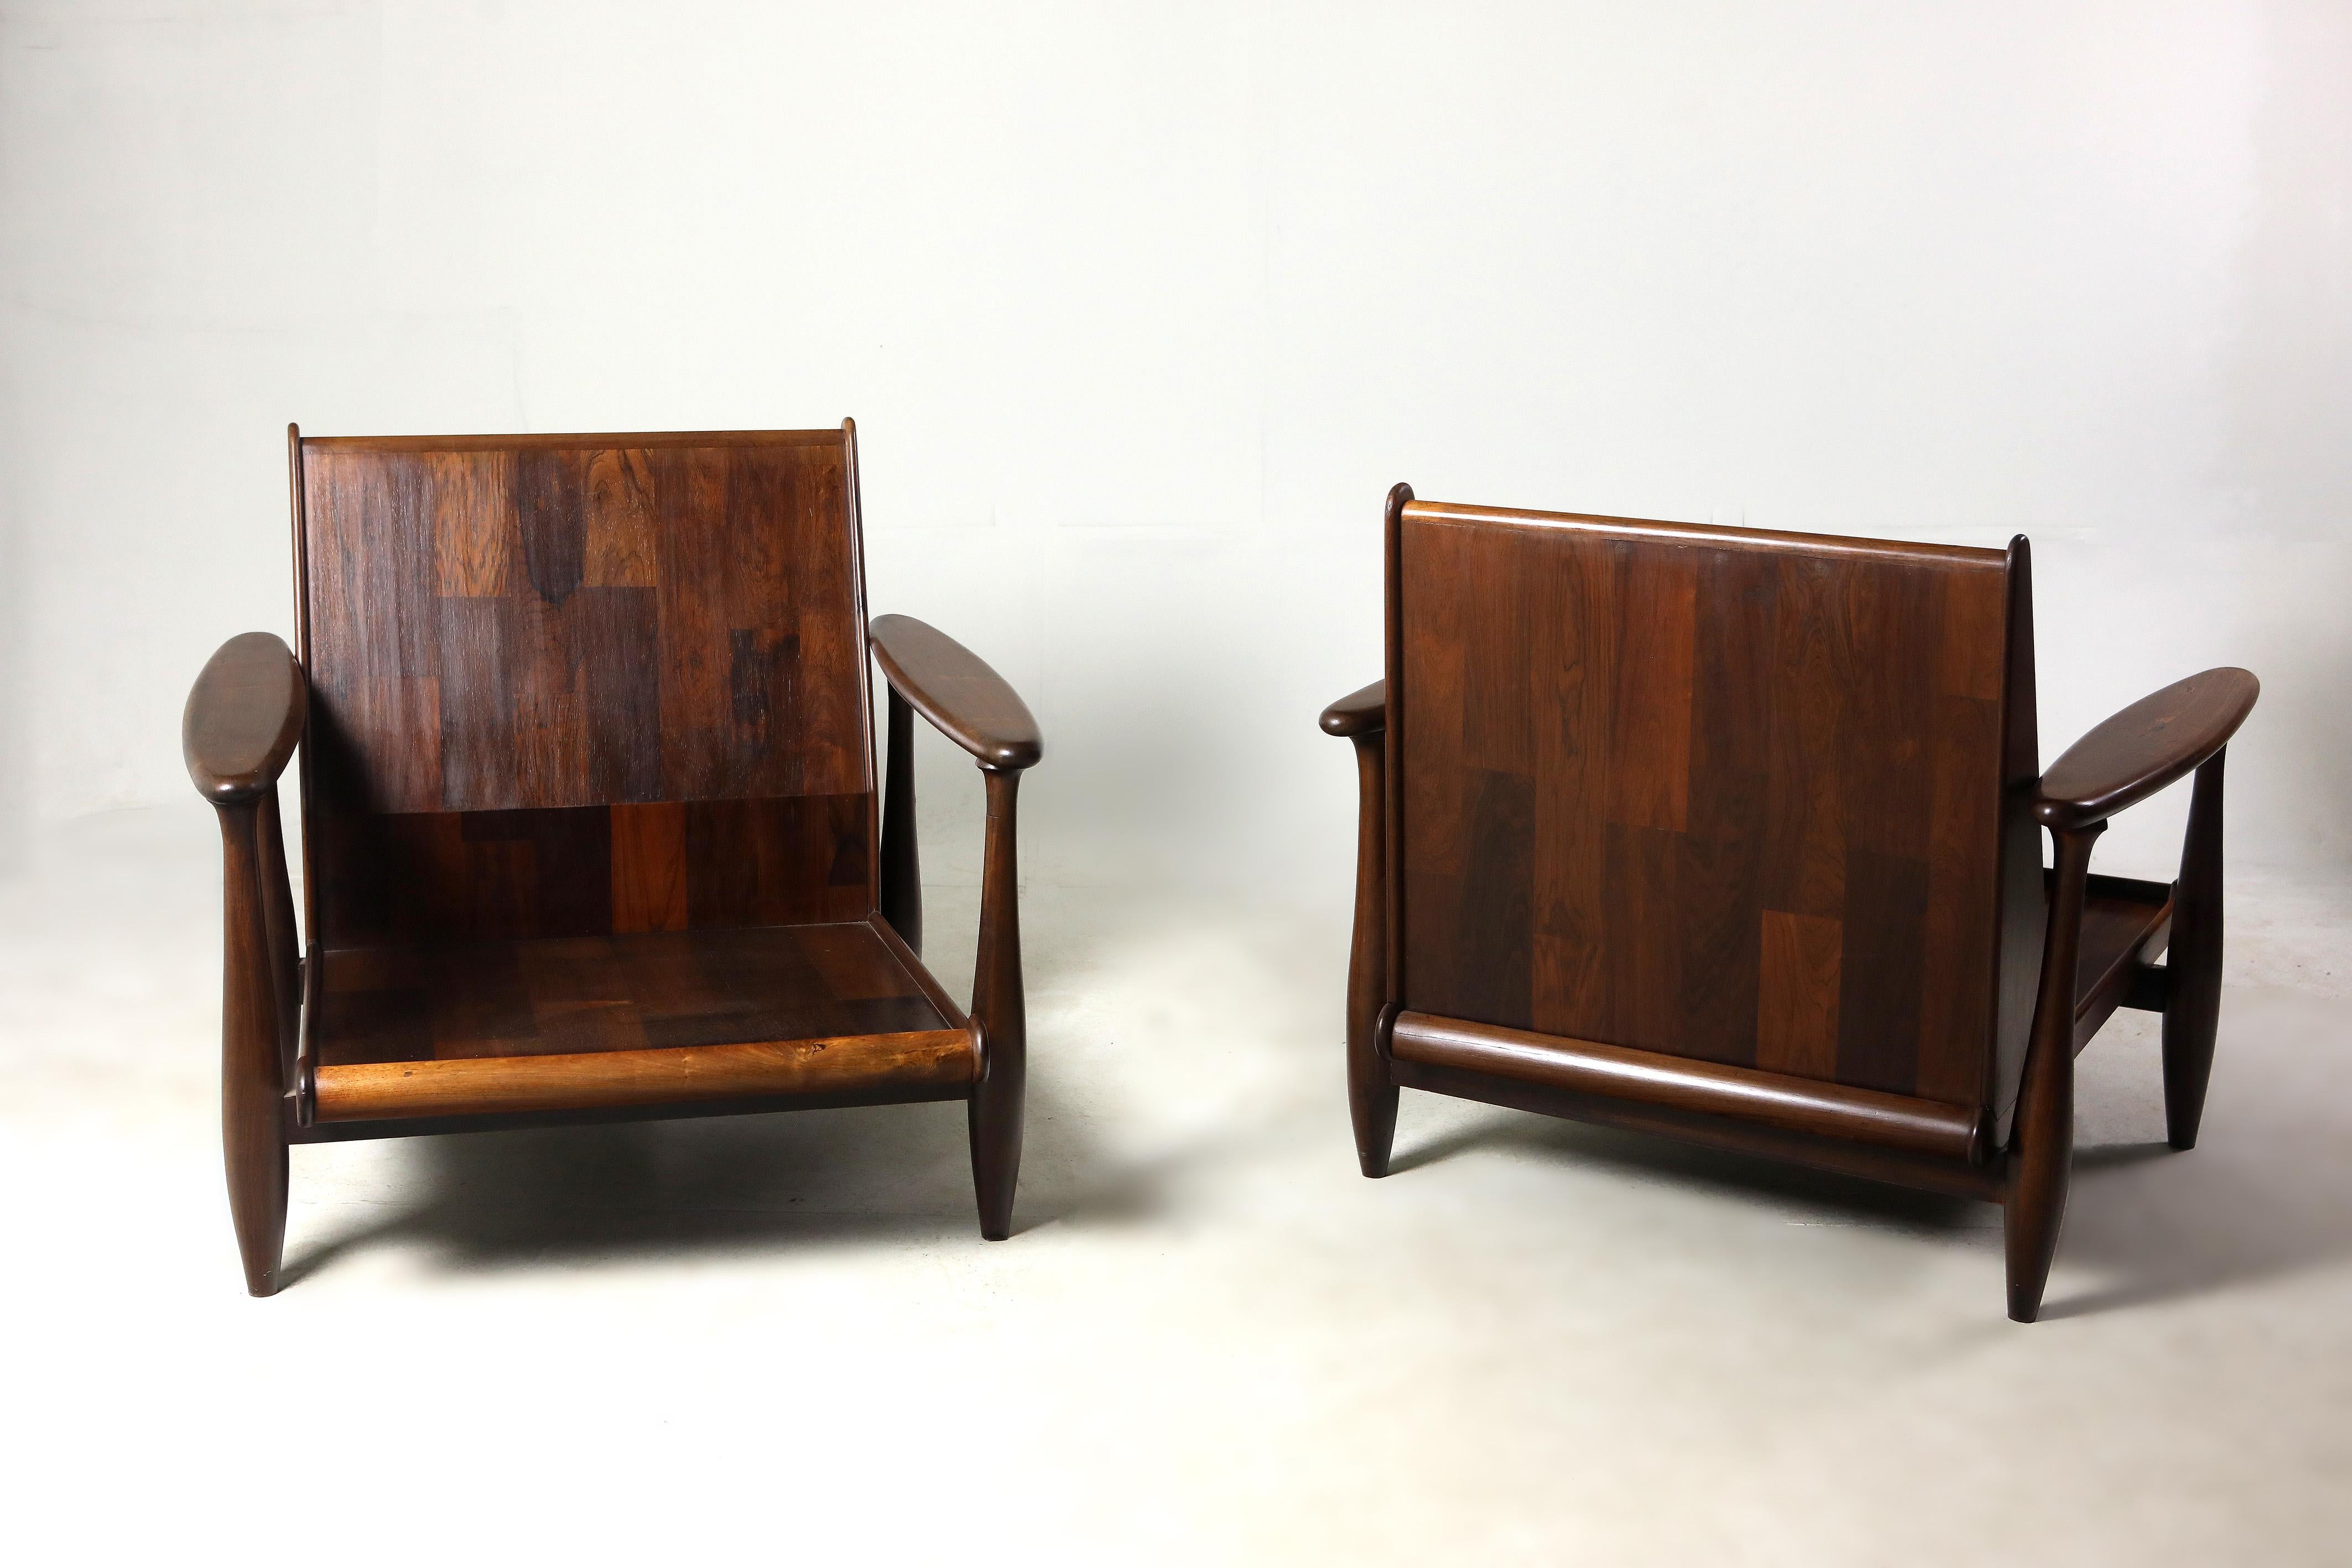 Brazilian Mid-Century Modern pair of armchairs by Liceu de Artes e Ofícios manufacture, Brazil, 1960s.

Pair of armchairs by the Brazilian manufacture Liceu de Artes e Ofícios, dating the 1960s. The armchair's nicely rounded structure is in solid